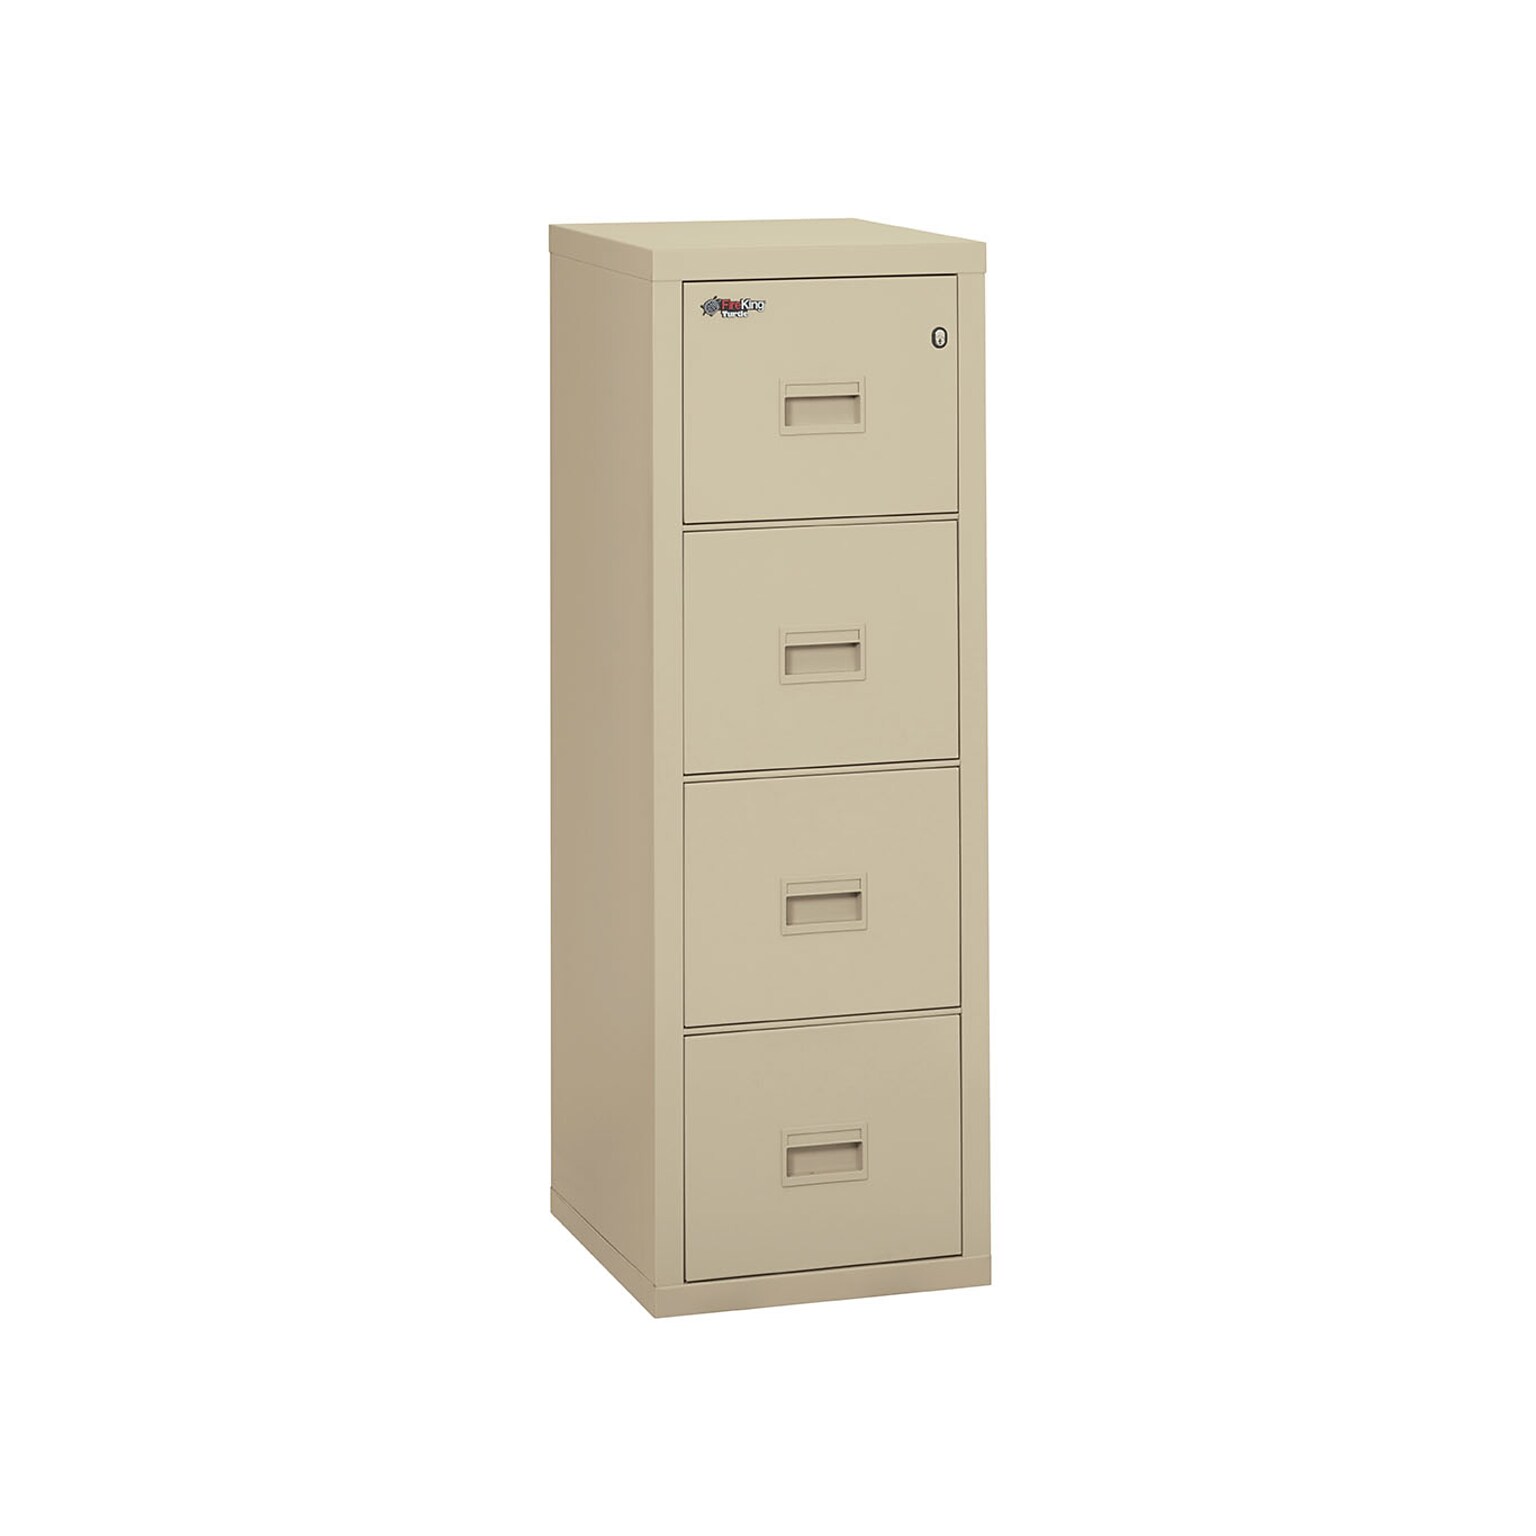 FireKing Turtle 4-Drawer Vertical File Cabinet, Fire Resistant, Letter/Legal, Parchment, 22.12 (4R1822-CPA)